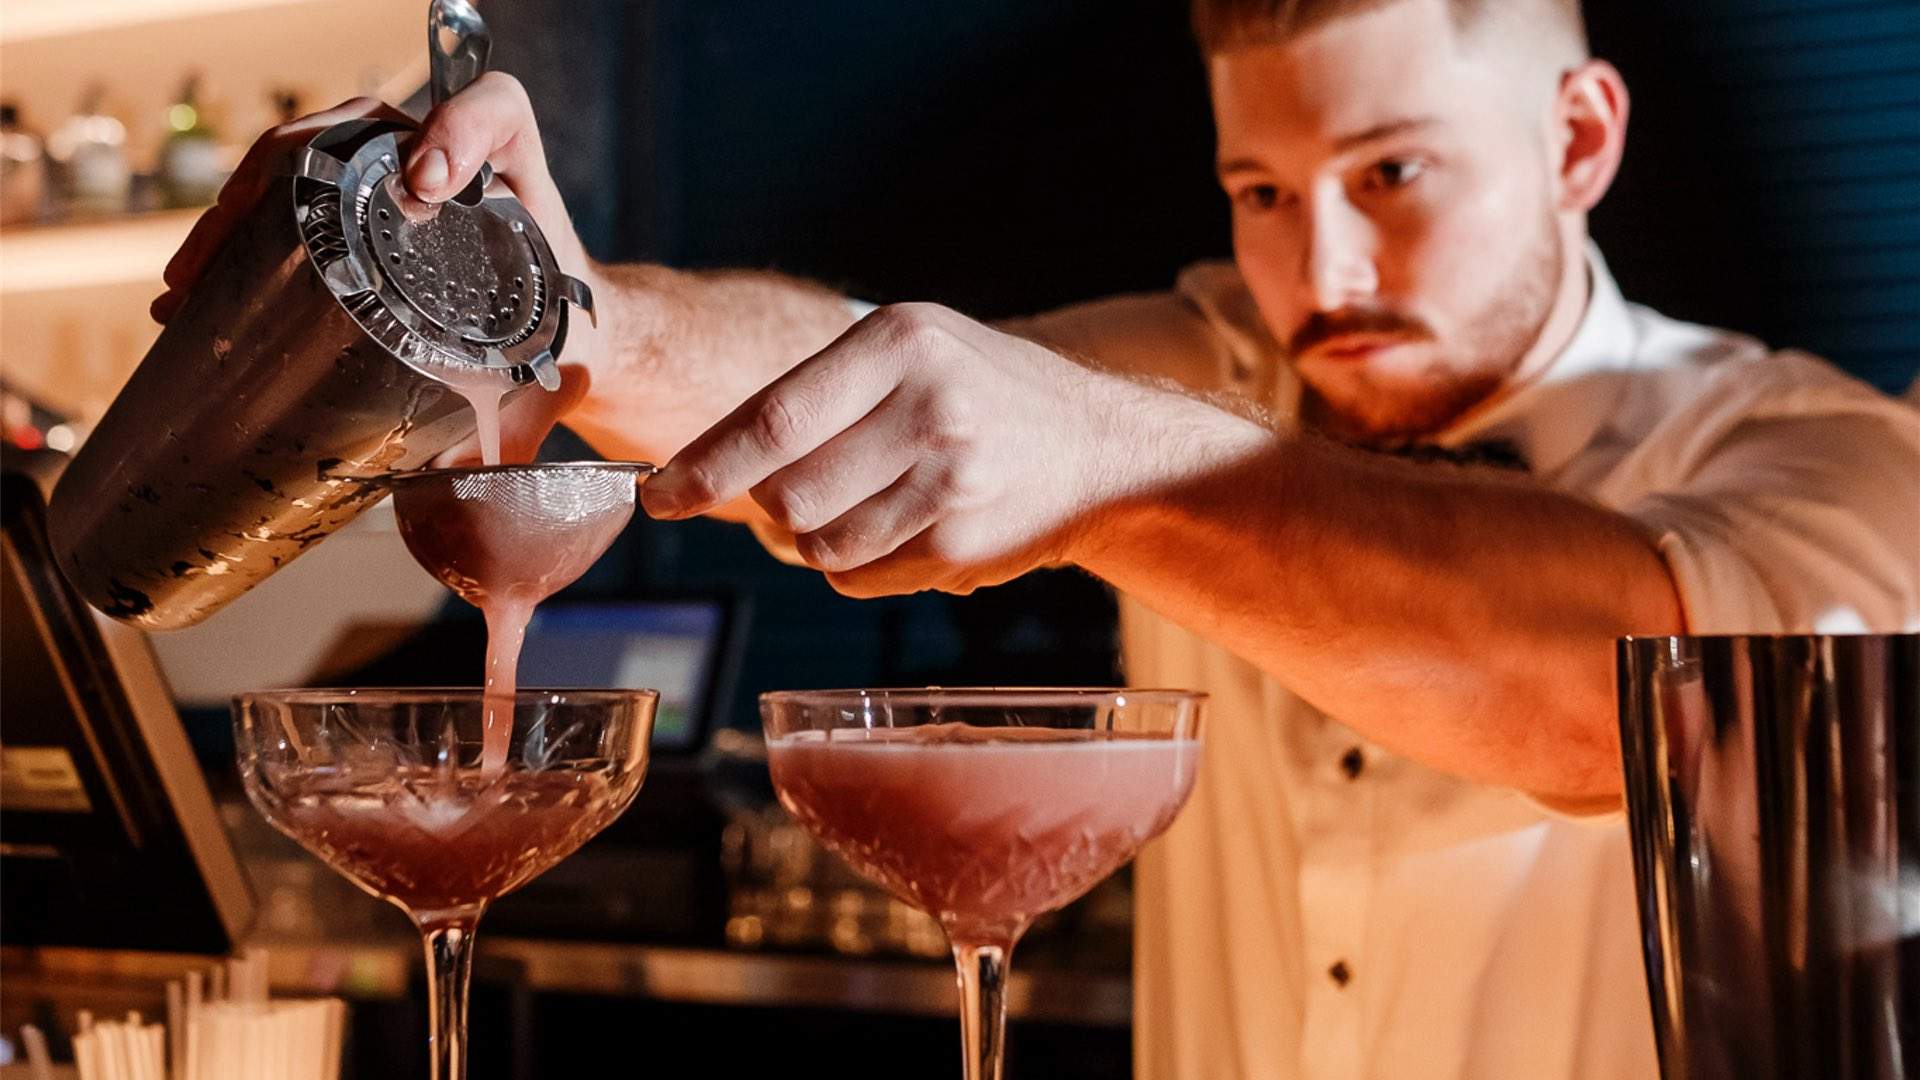 Swill Is Welcome to Bowen Hills' New Specialty Gin Bar